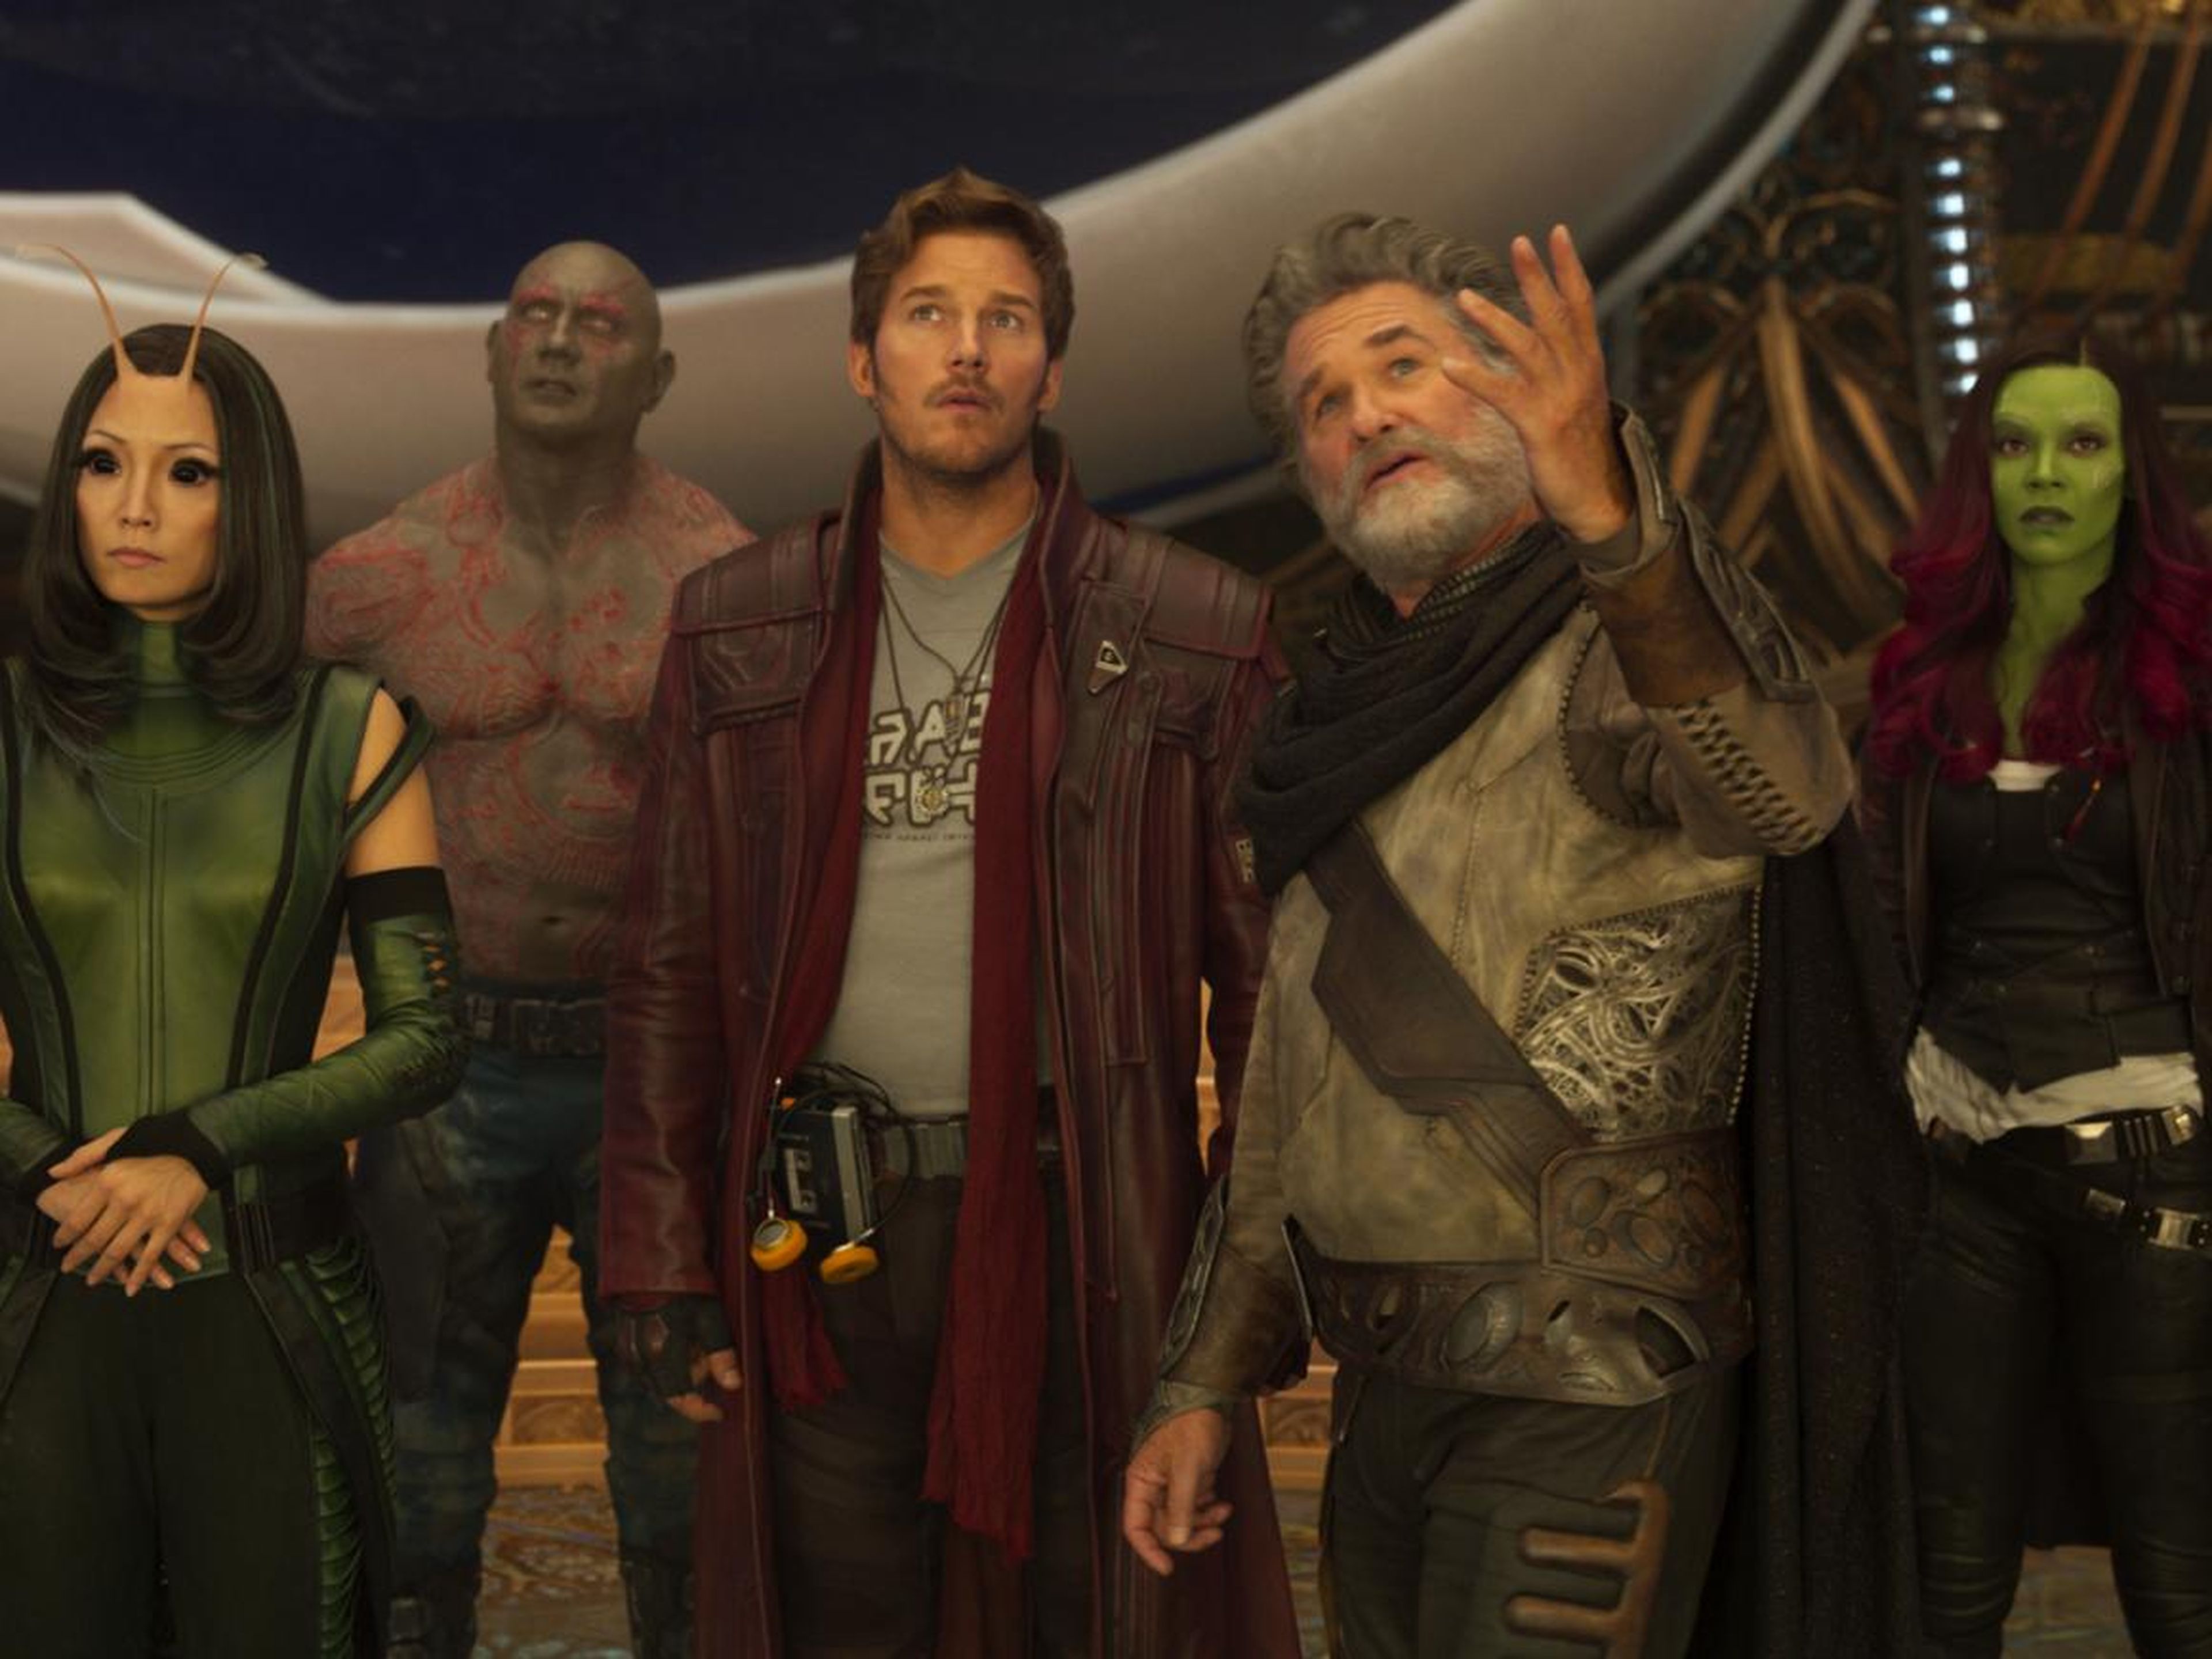 11. "Guardians of the Galaxy Vol. 2" (2017)